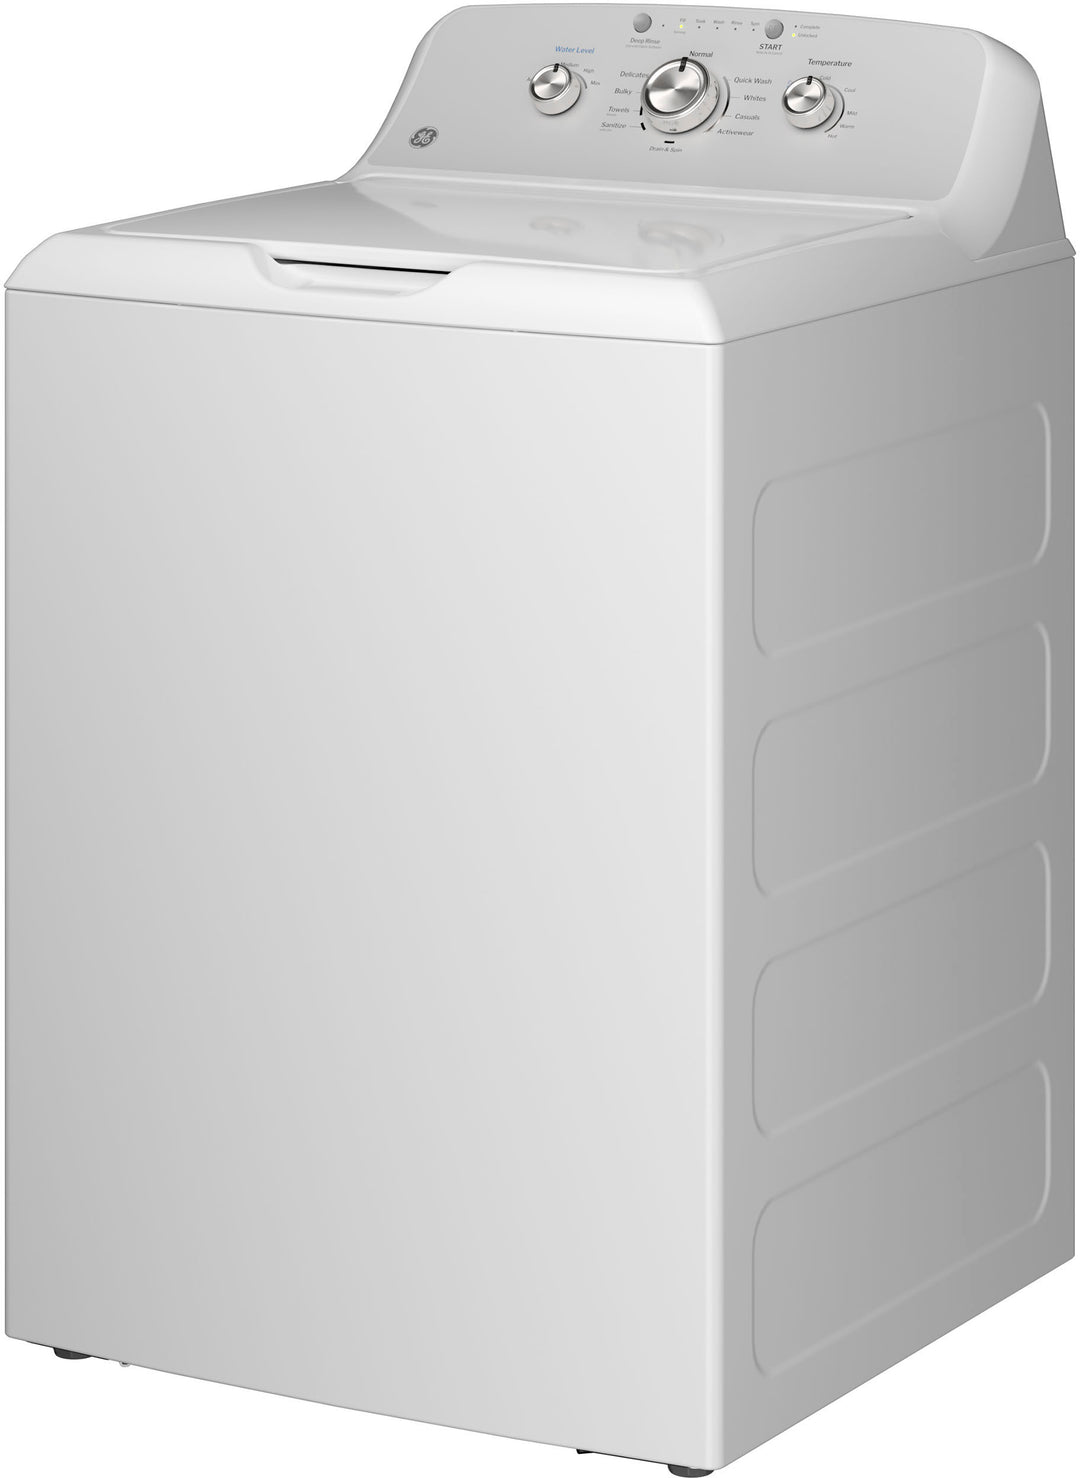 GE - 4.3 Cu. Ft. High-Efficiency Top Load Washer with Cold Plus - White_18